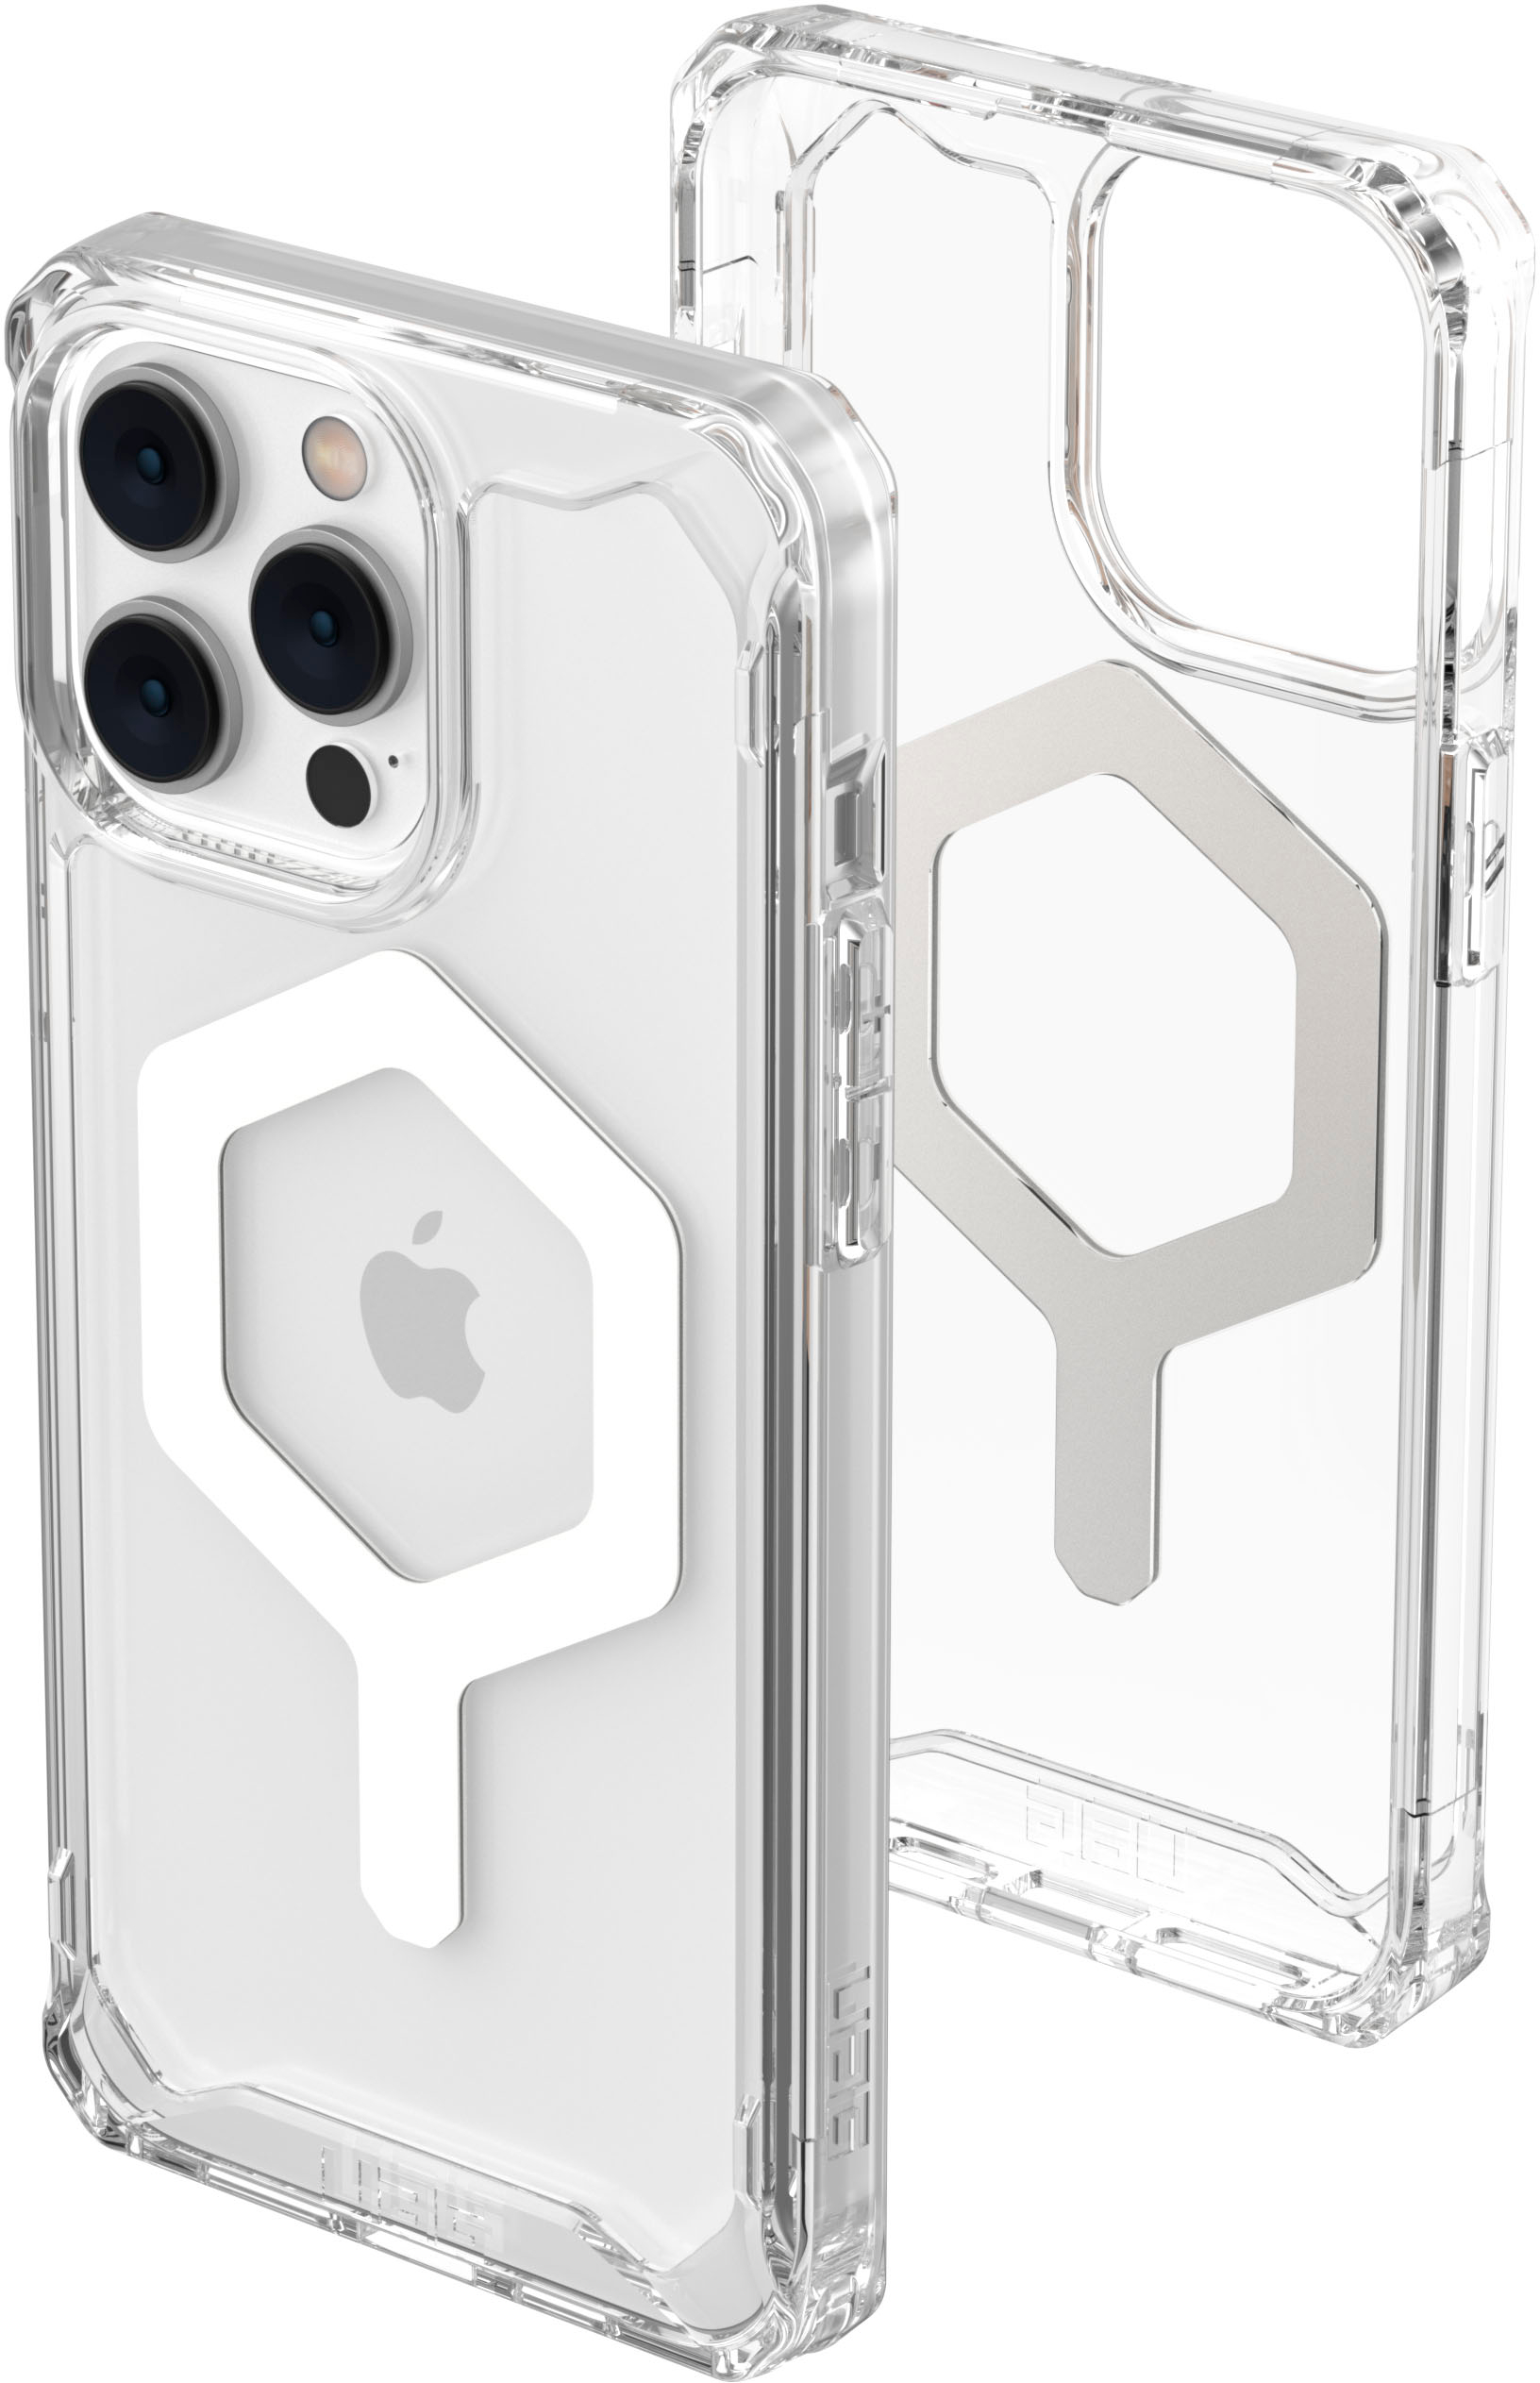 UAG Plyo Series w/Magnet for Magsafe & Without for iPhone 15 Pro Max 